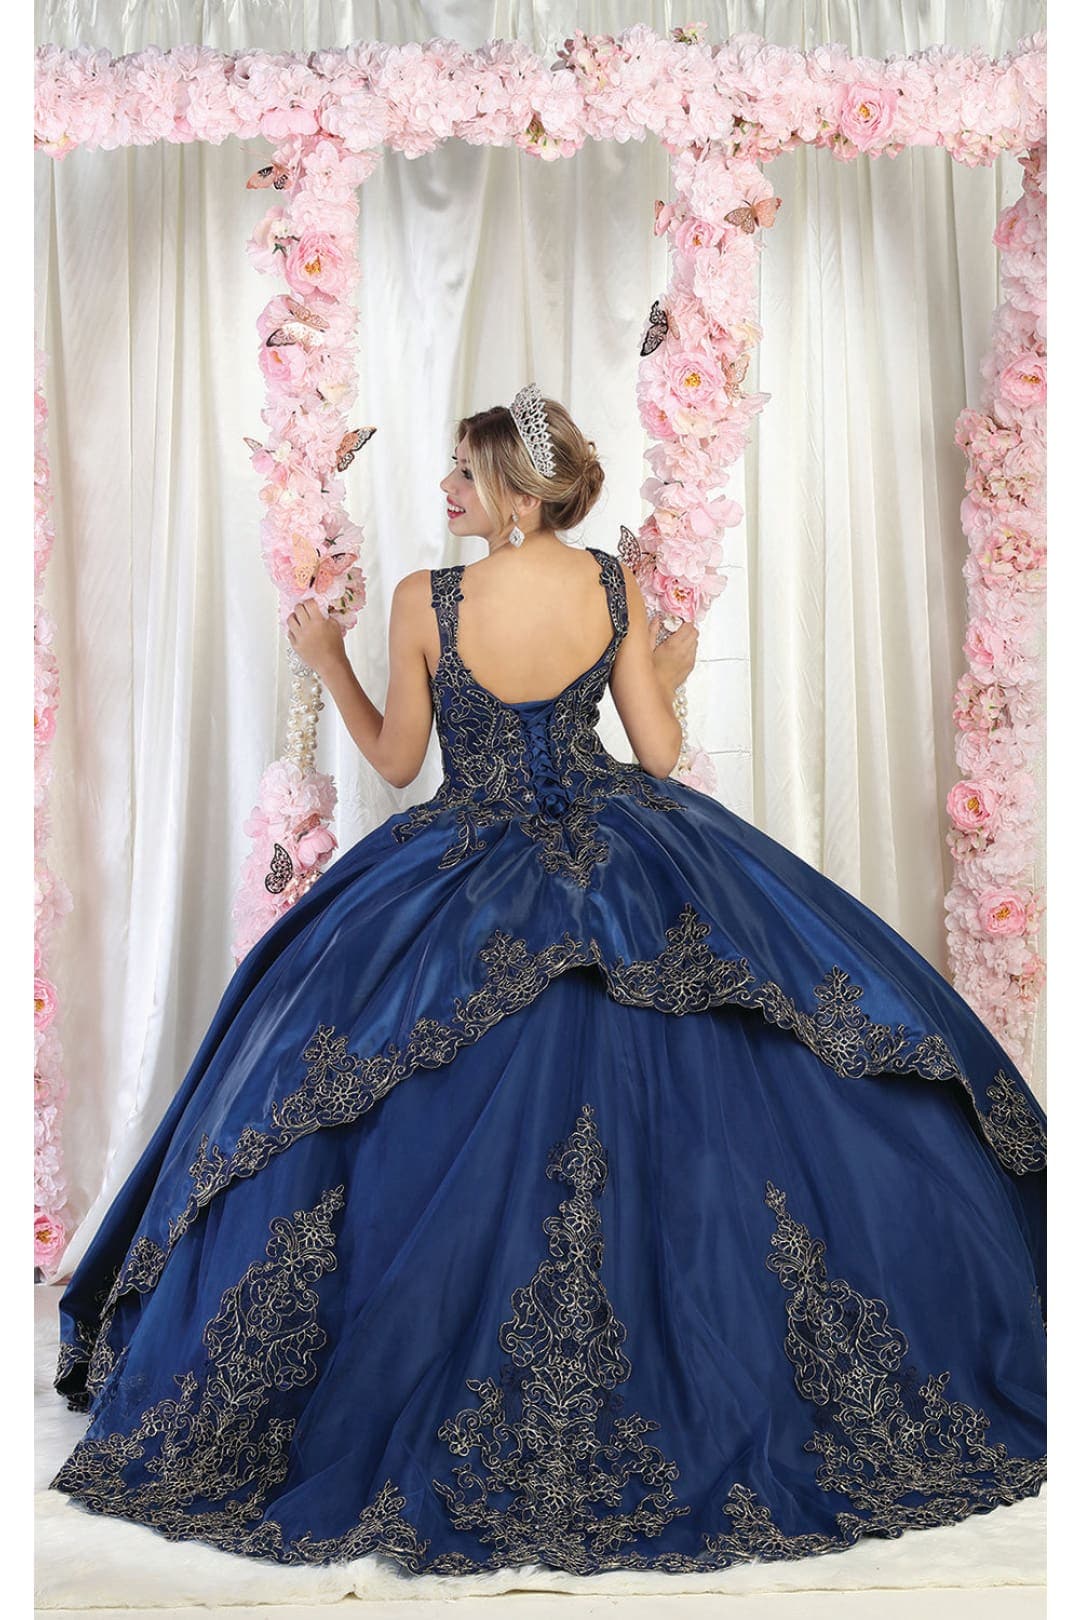 Layla K LK196 Embroidered Quinceanera Ball Gown